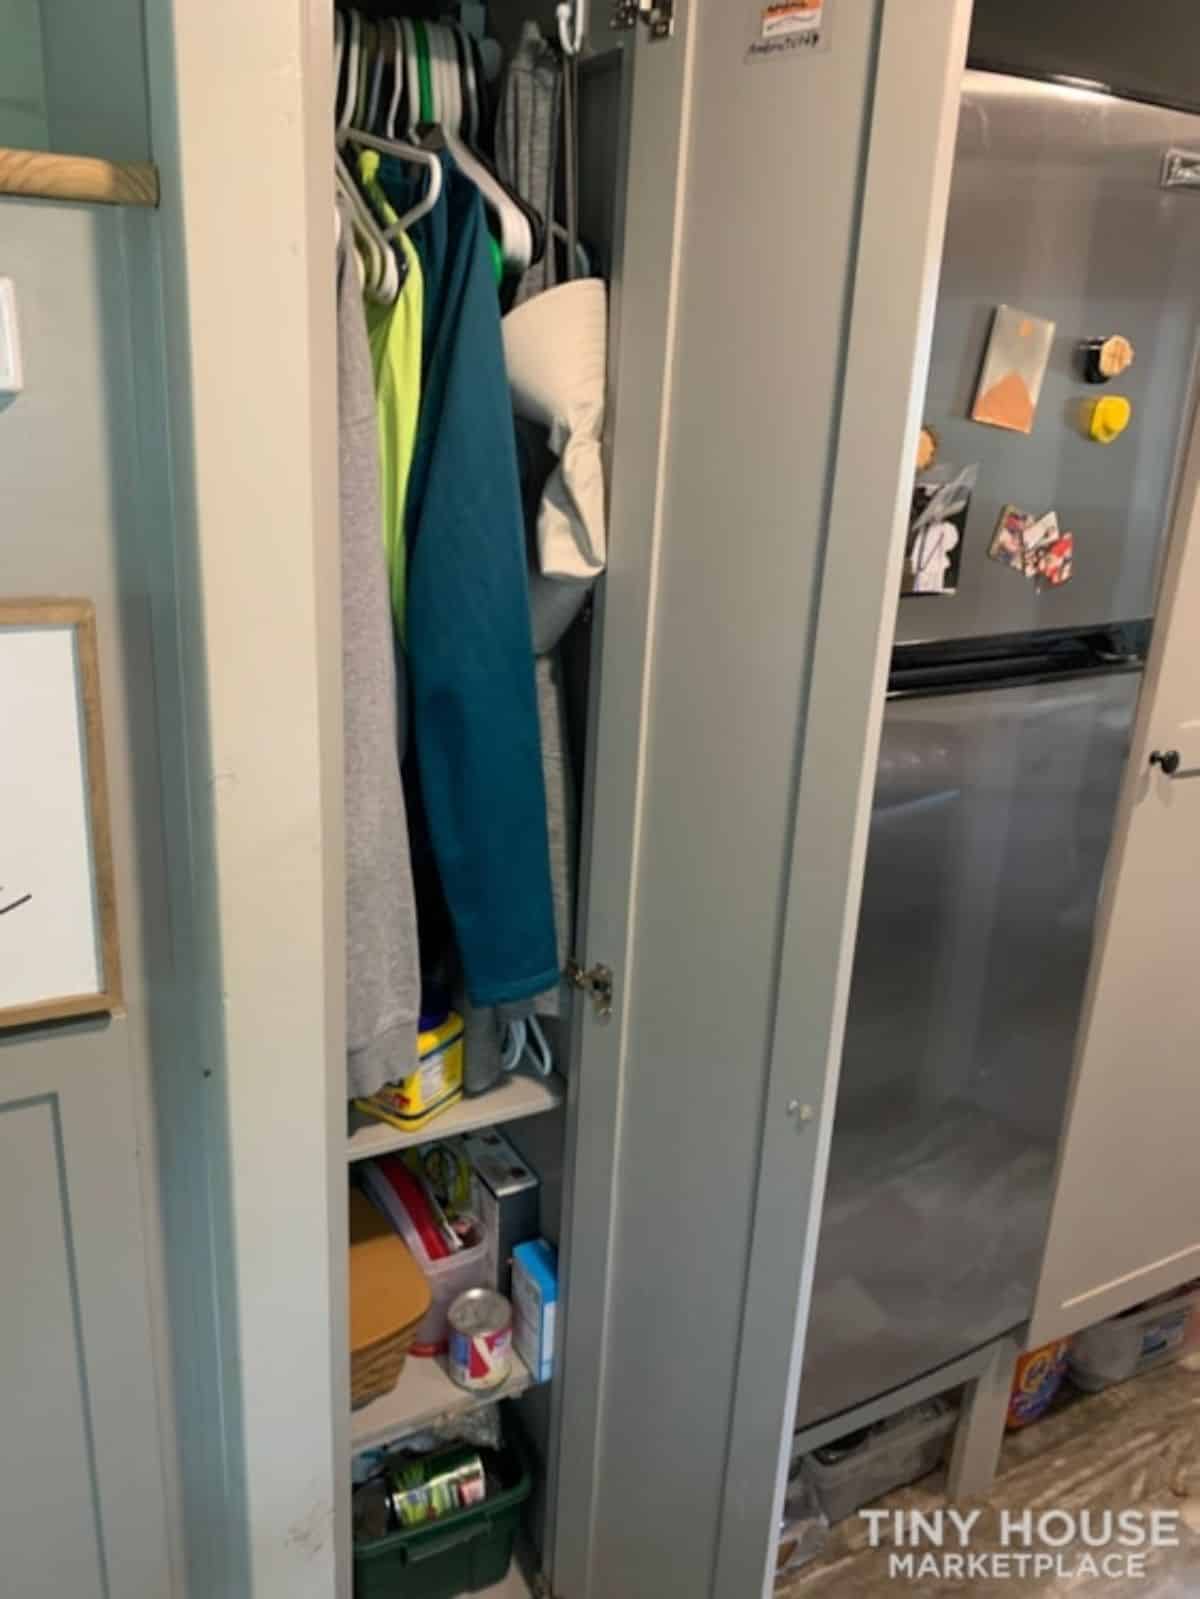 Storage cabinets besides the refrigerator under the stairs